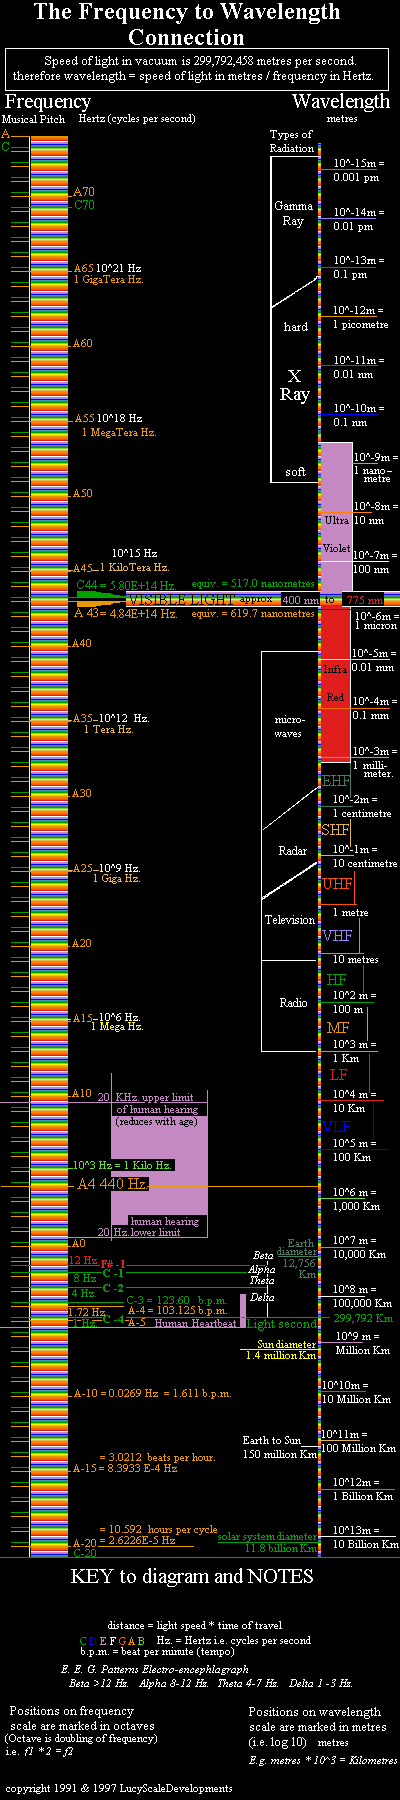 frequency to wavelength - the connections